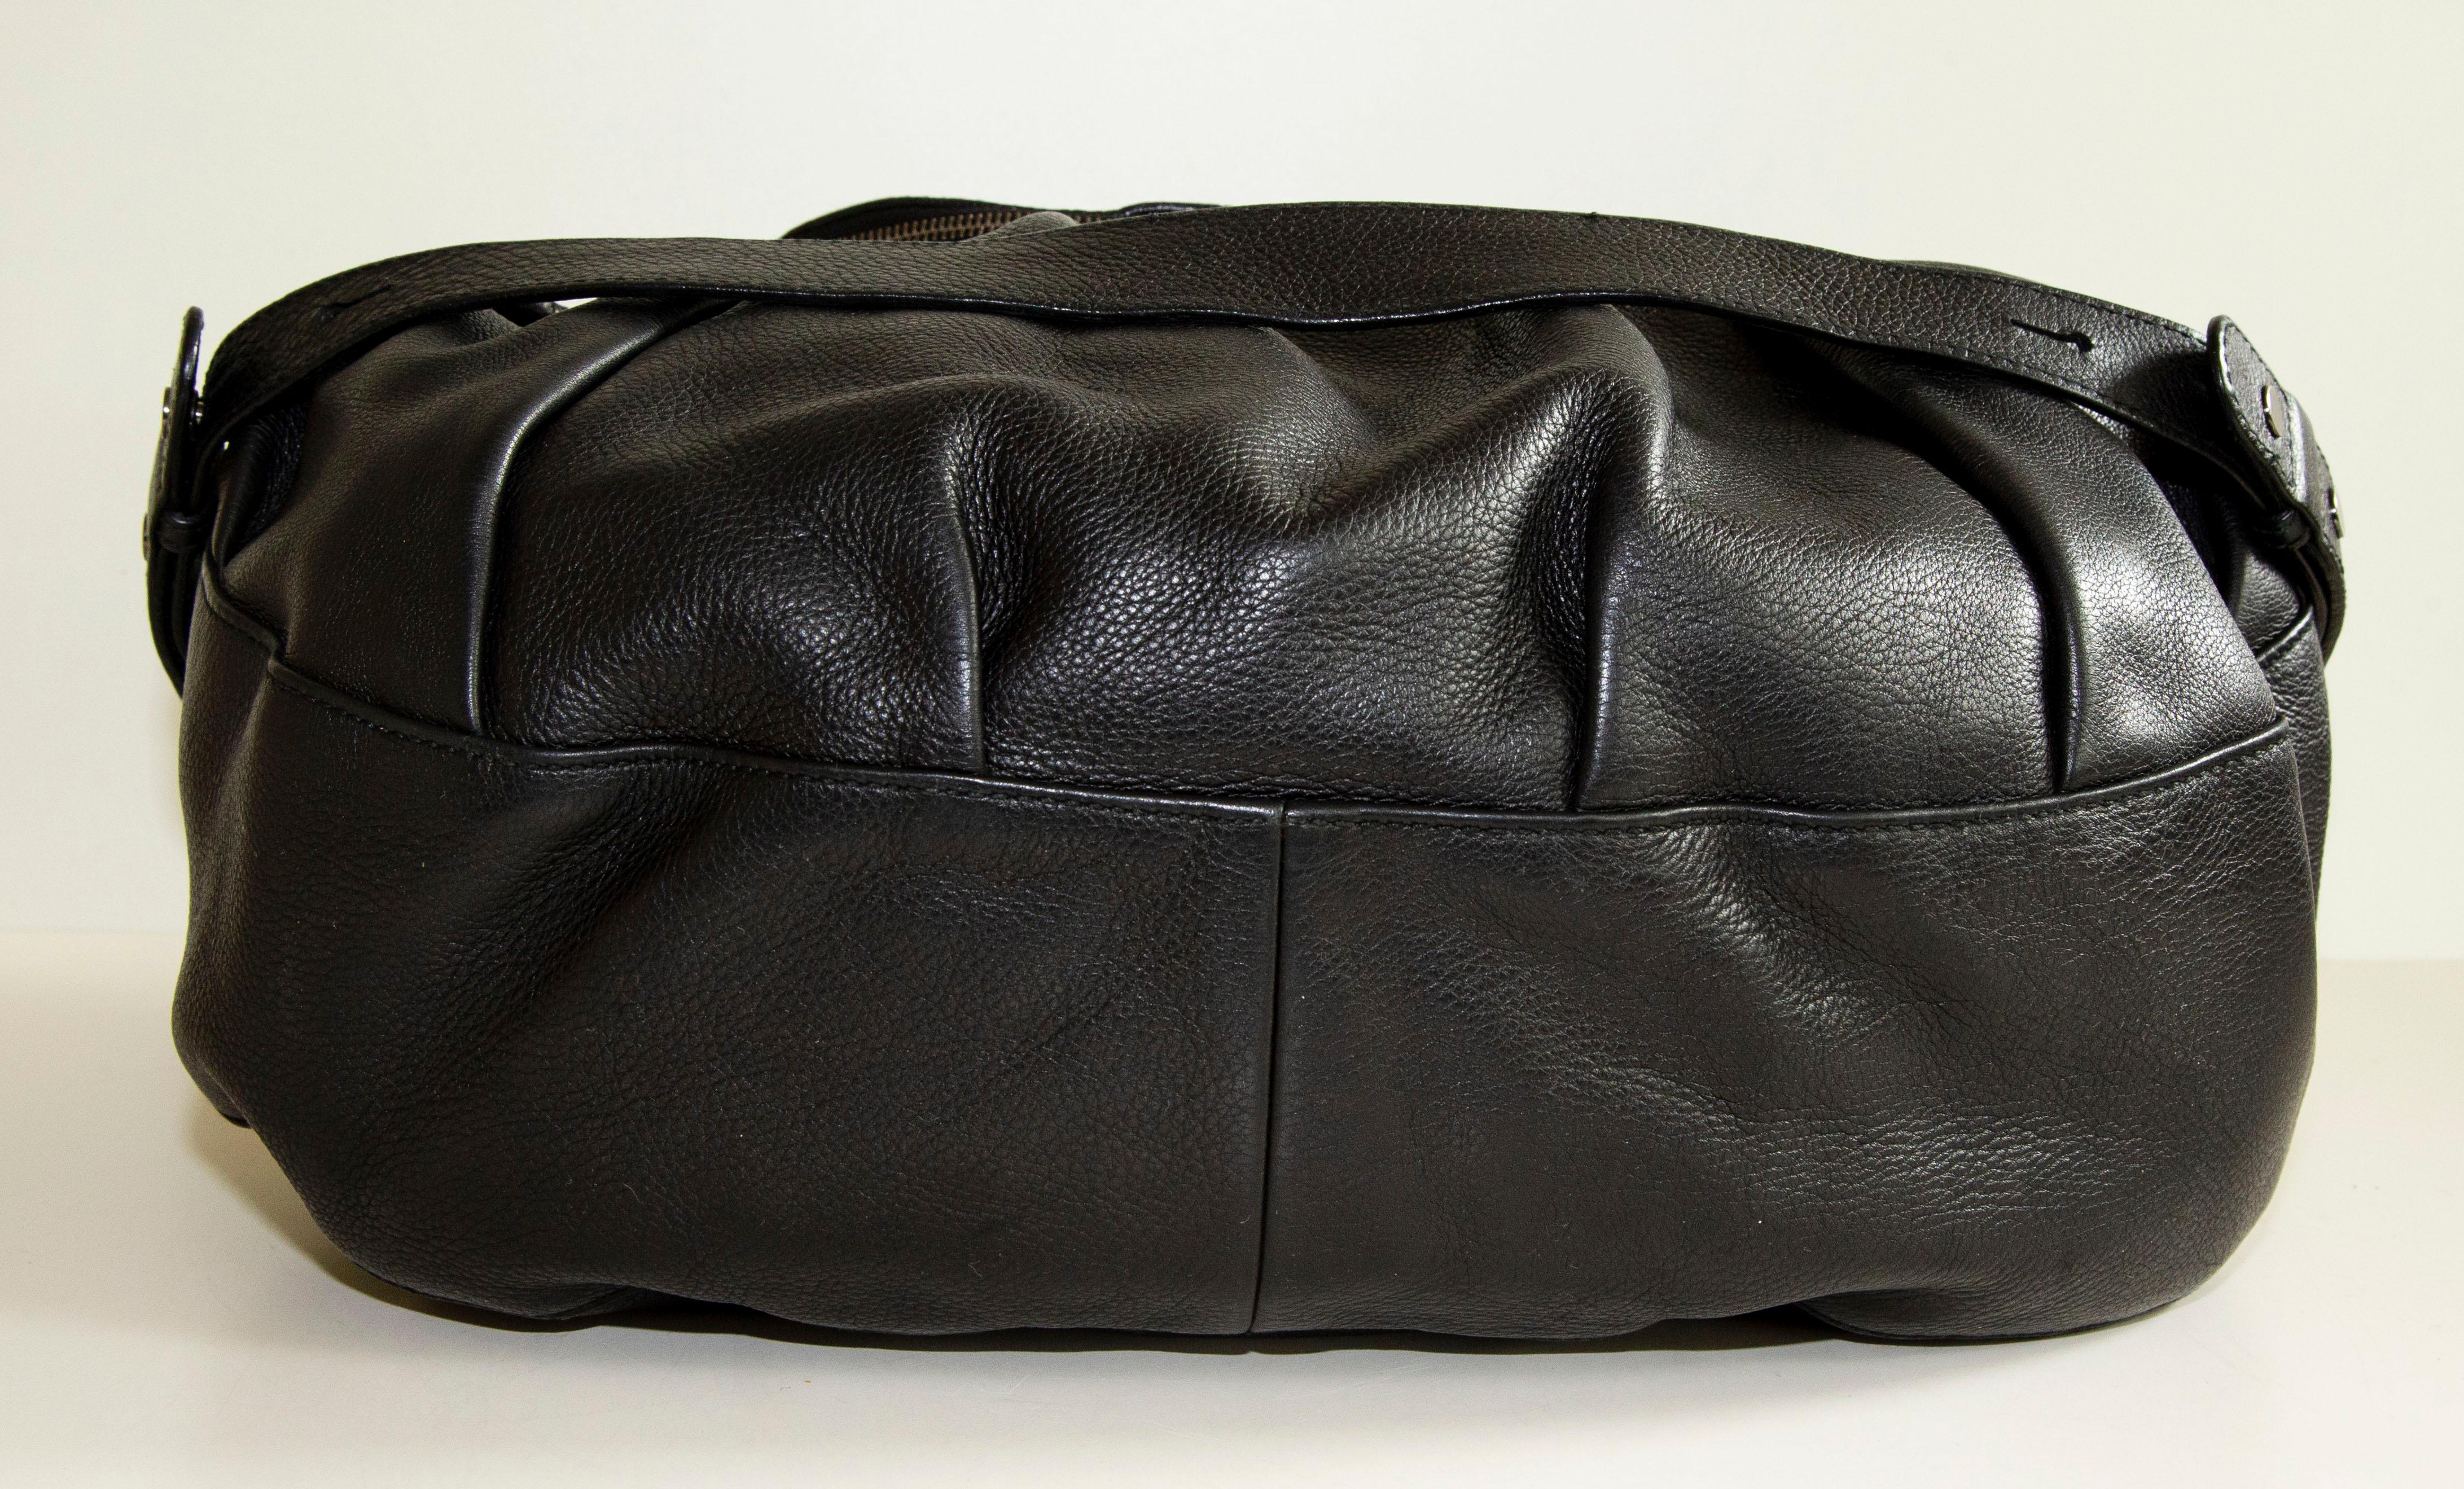 Women's or Men's Gucci Icon Bit Medium Pebbled Leather Shoulder Bag in Black Leather For Sale